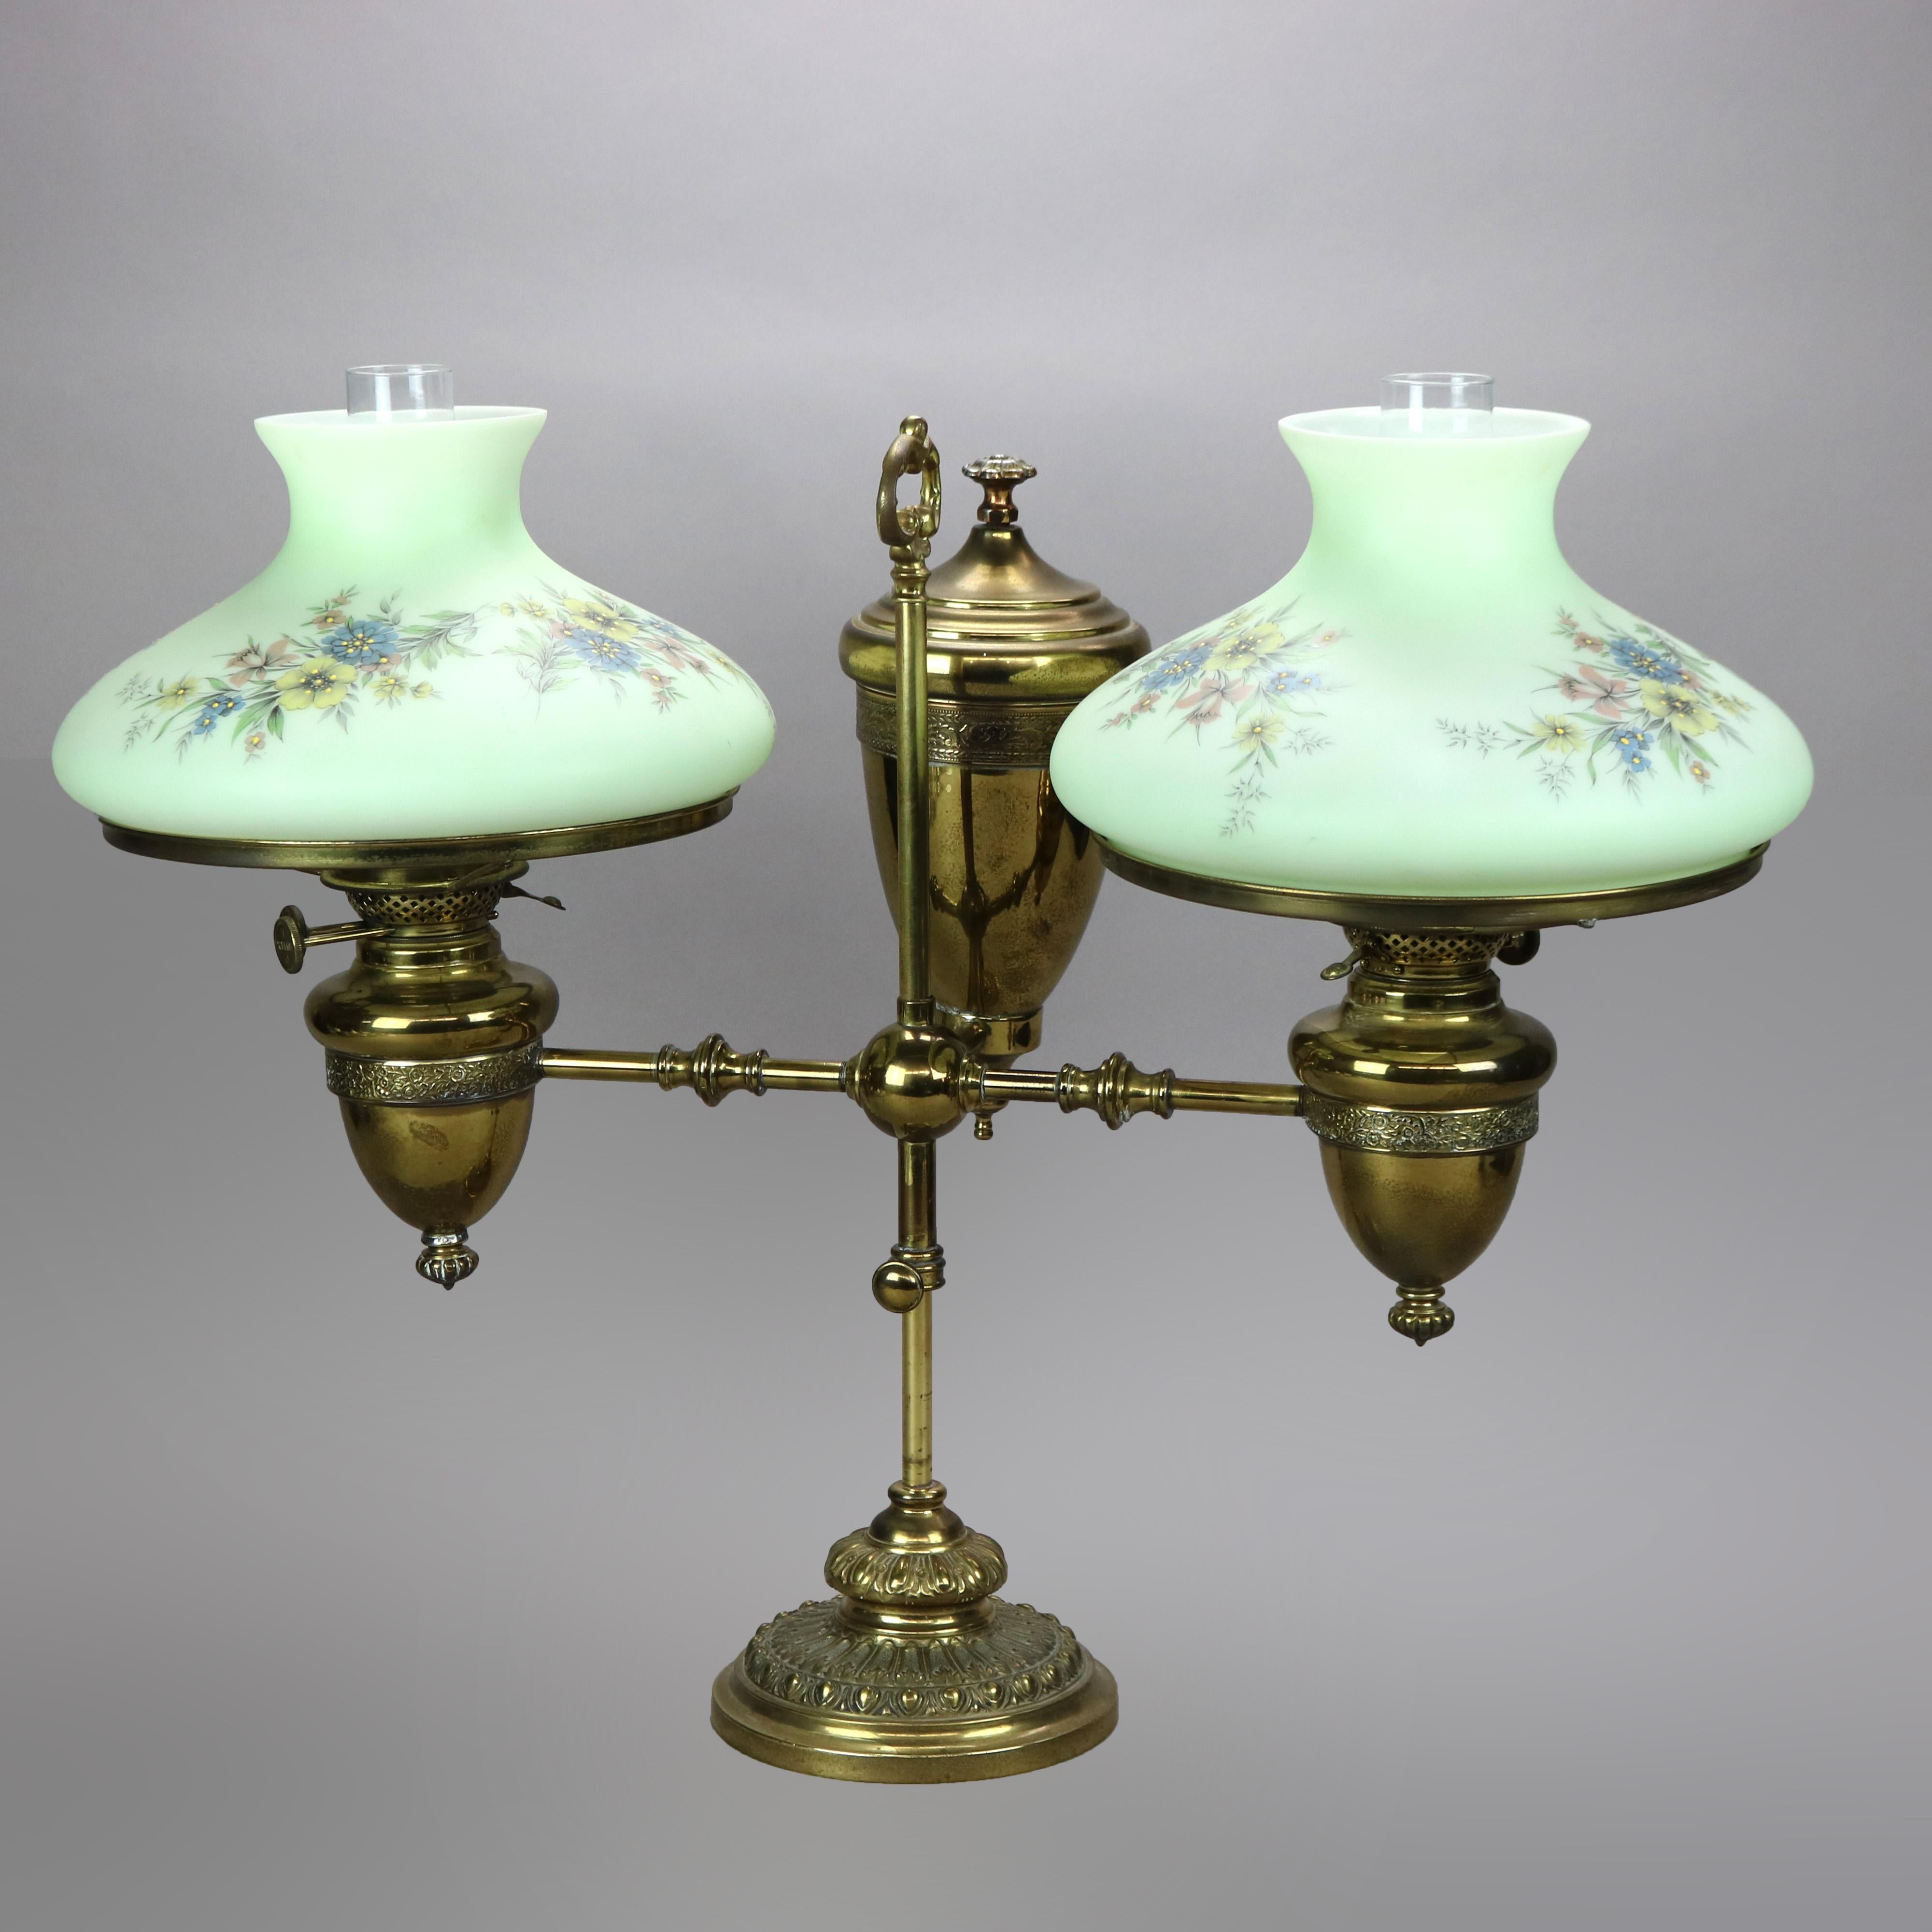 An antique Harvard school double student oil lamp by Duplex offers brass frame with adjustable arm terminating in two lights having hand painted floral cased glass shades, raised on base having embossed floral elements, not electrified,